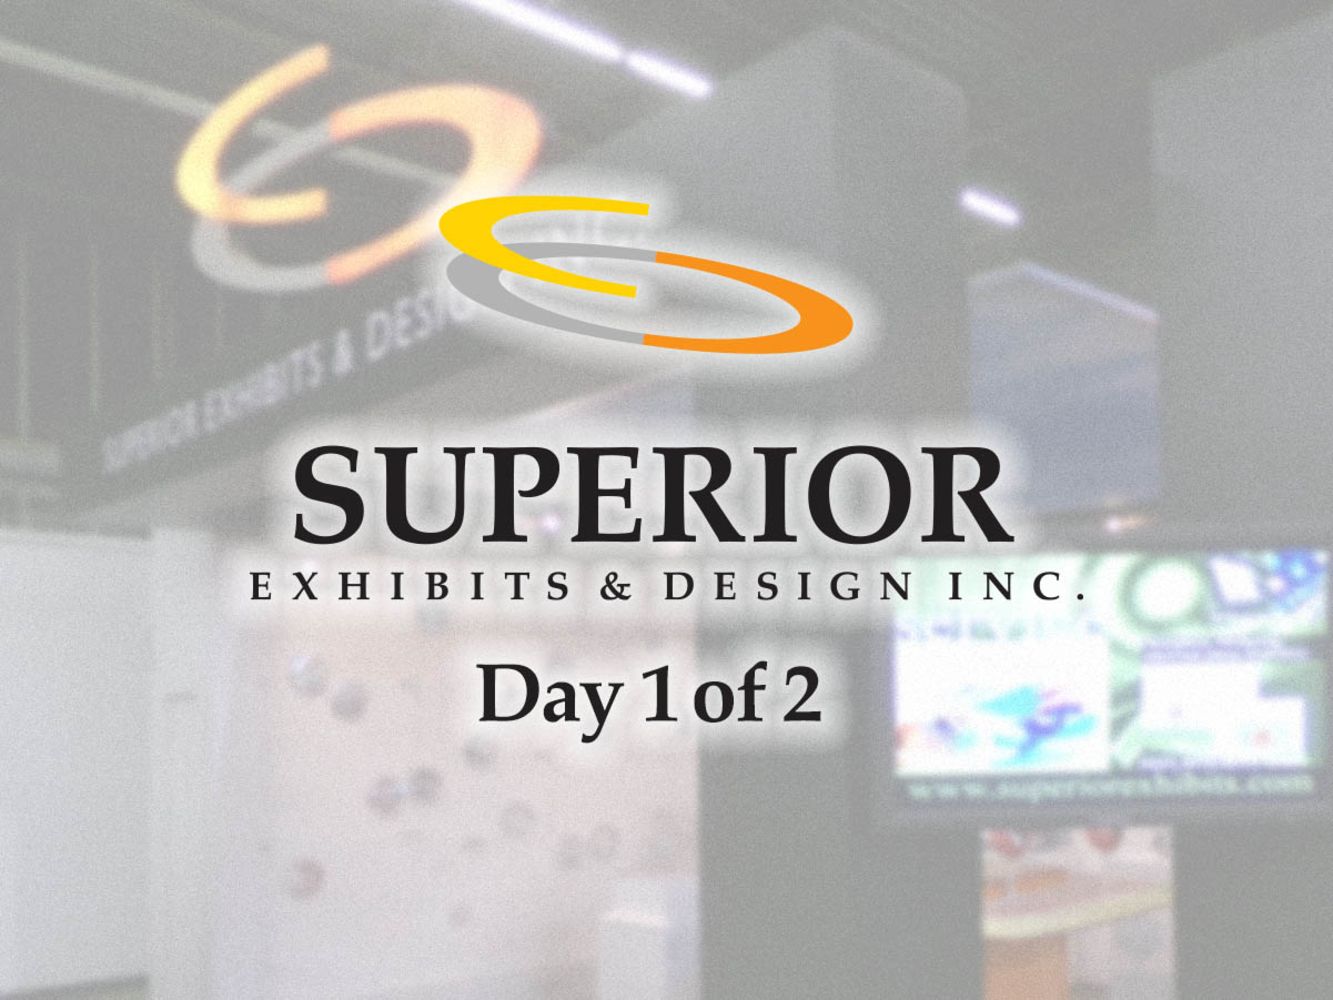 Superior Exhibits and Design DAY 1 of 2 – Architectural exhibit design and fabrication company - Assignee sale for the benefit of creditors